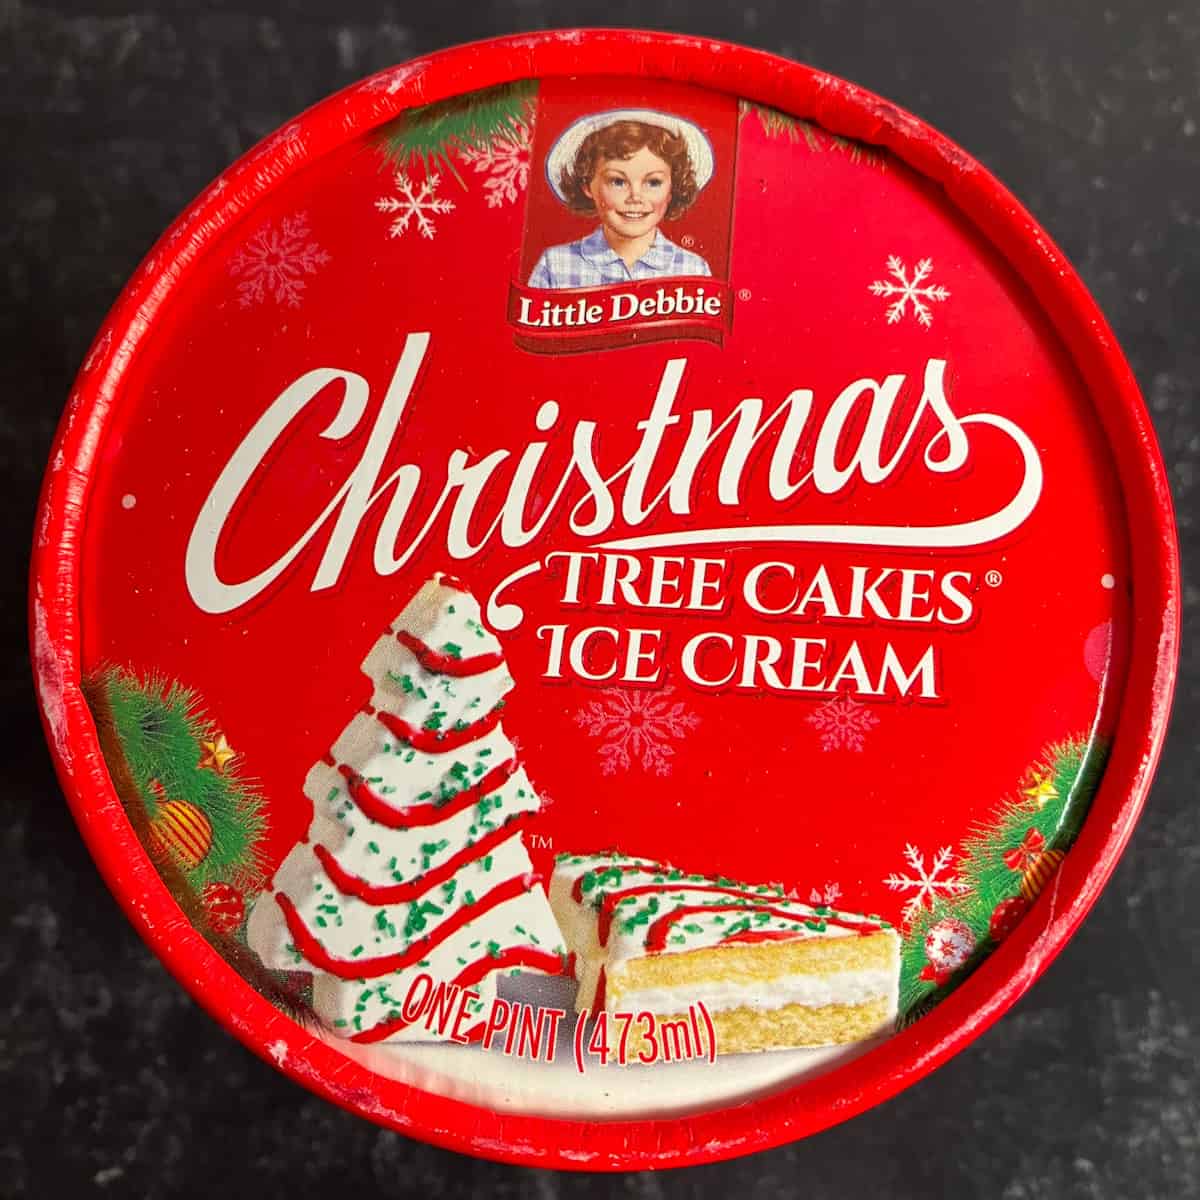 Little Debbie Christmas Tree Cake Ice Cream (Review and Recipe)